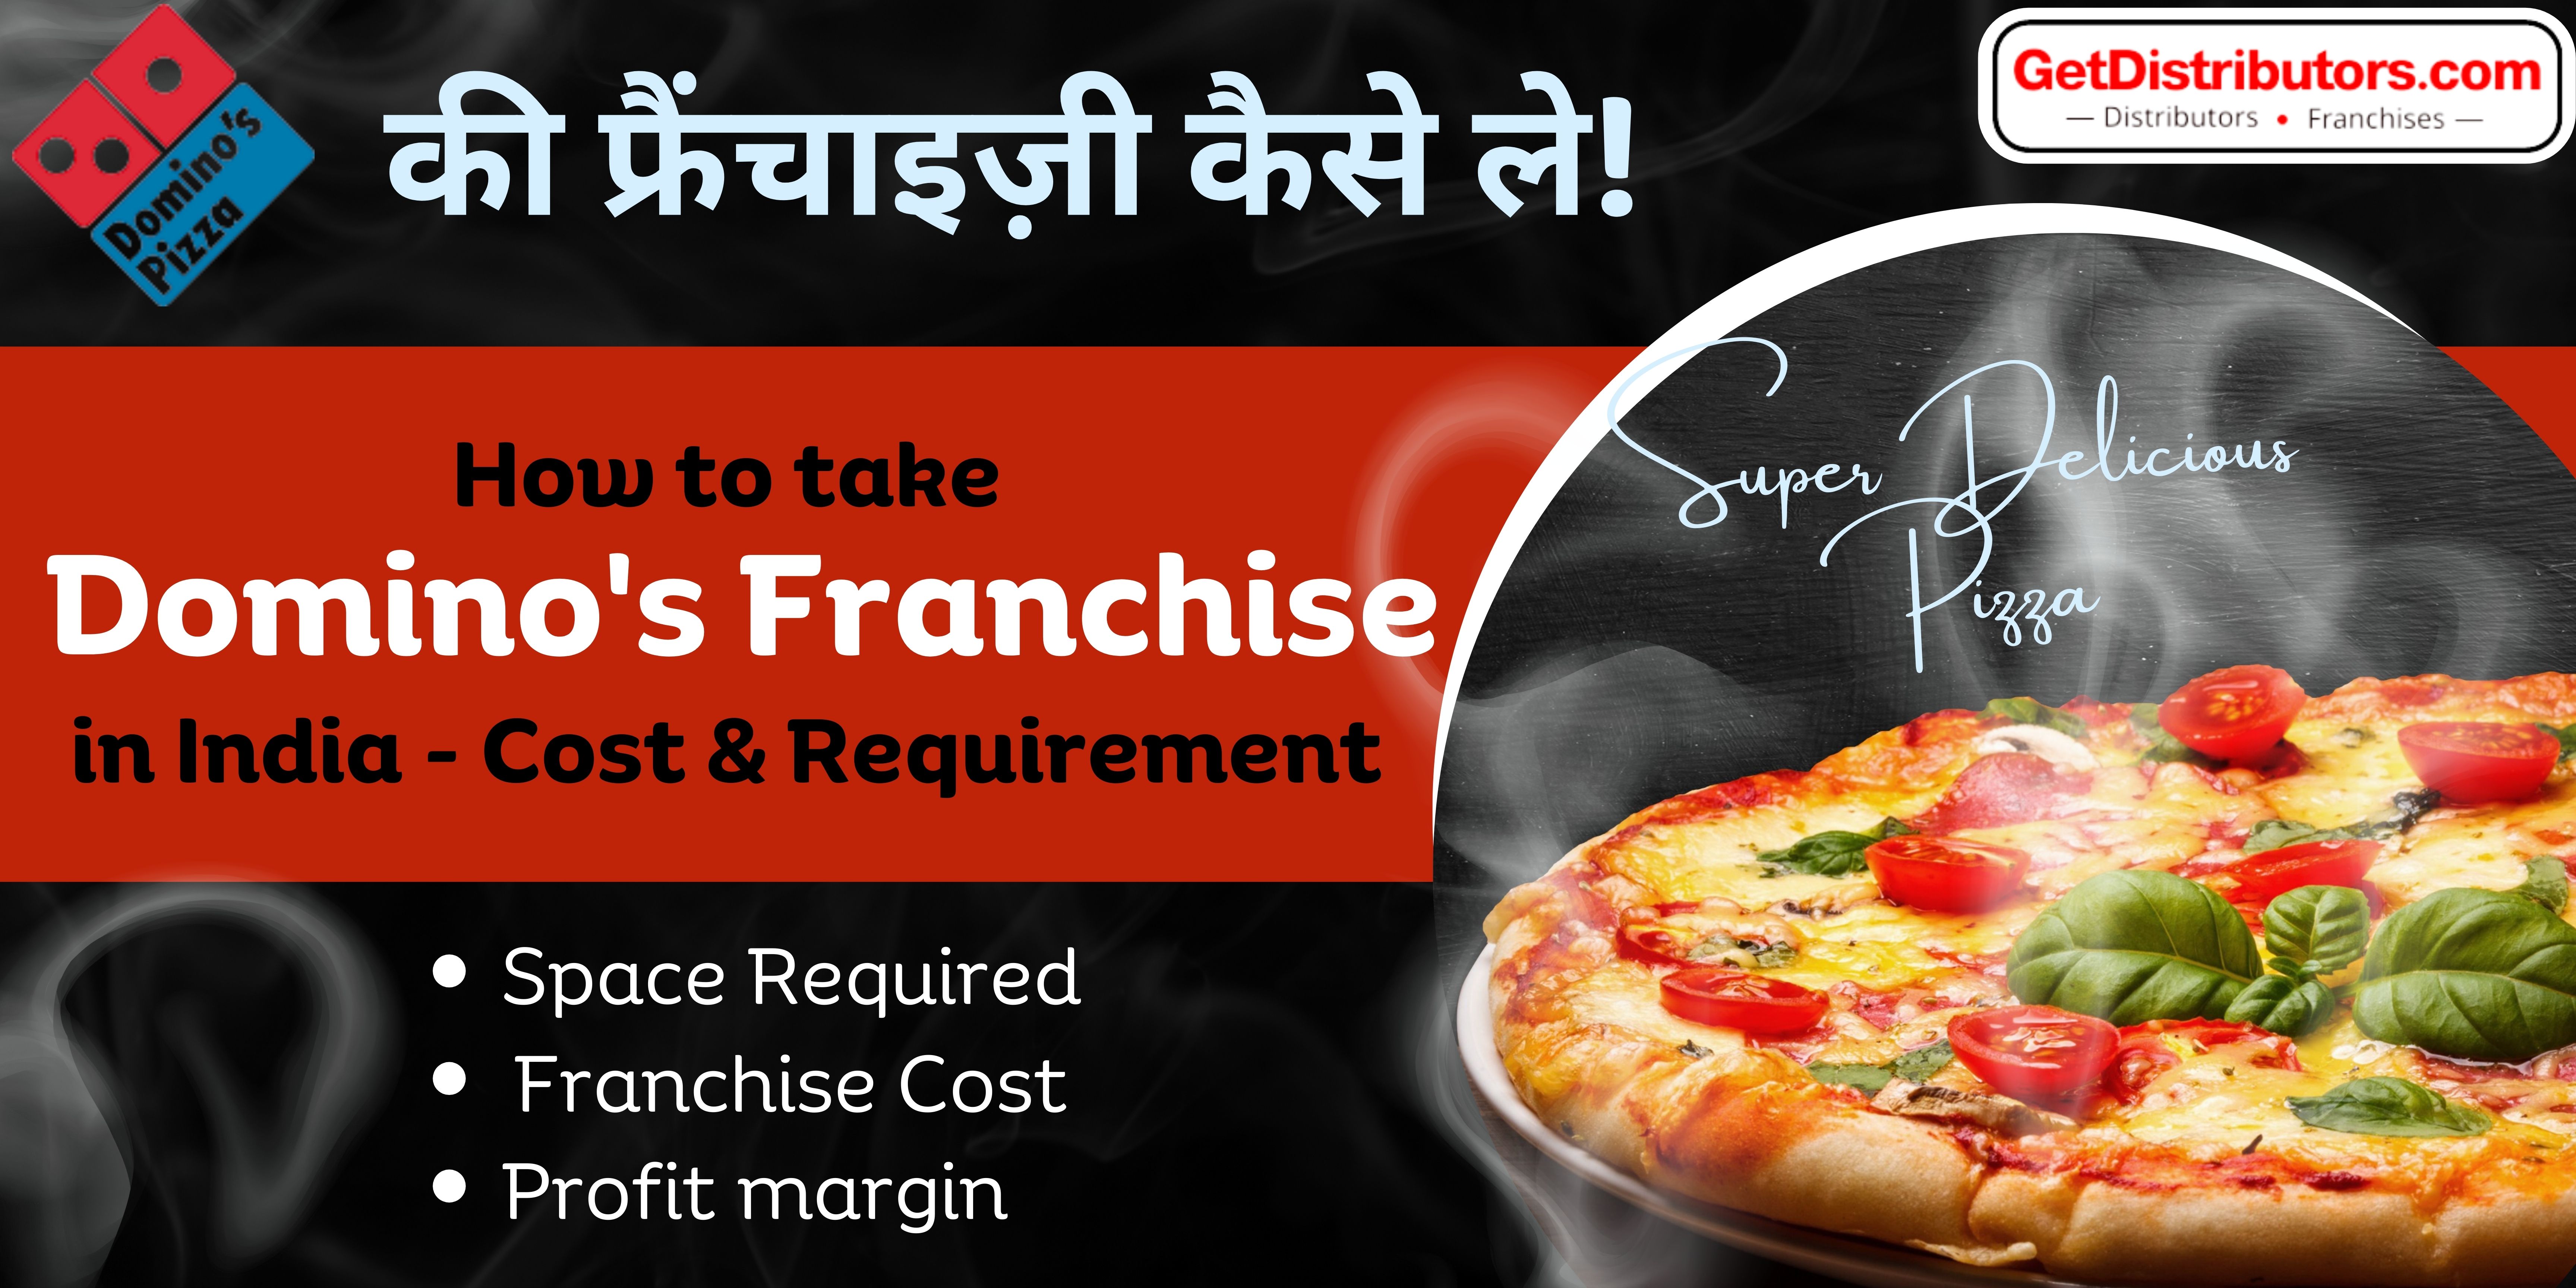 How to take Domino's Franchise in India - Cost & Requirement